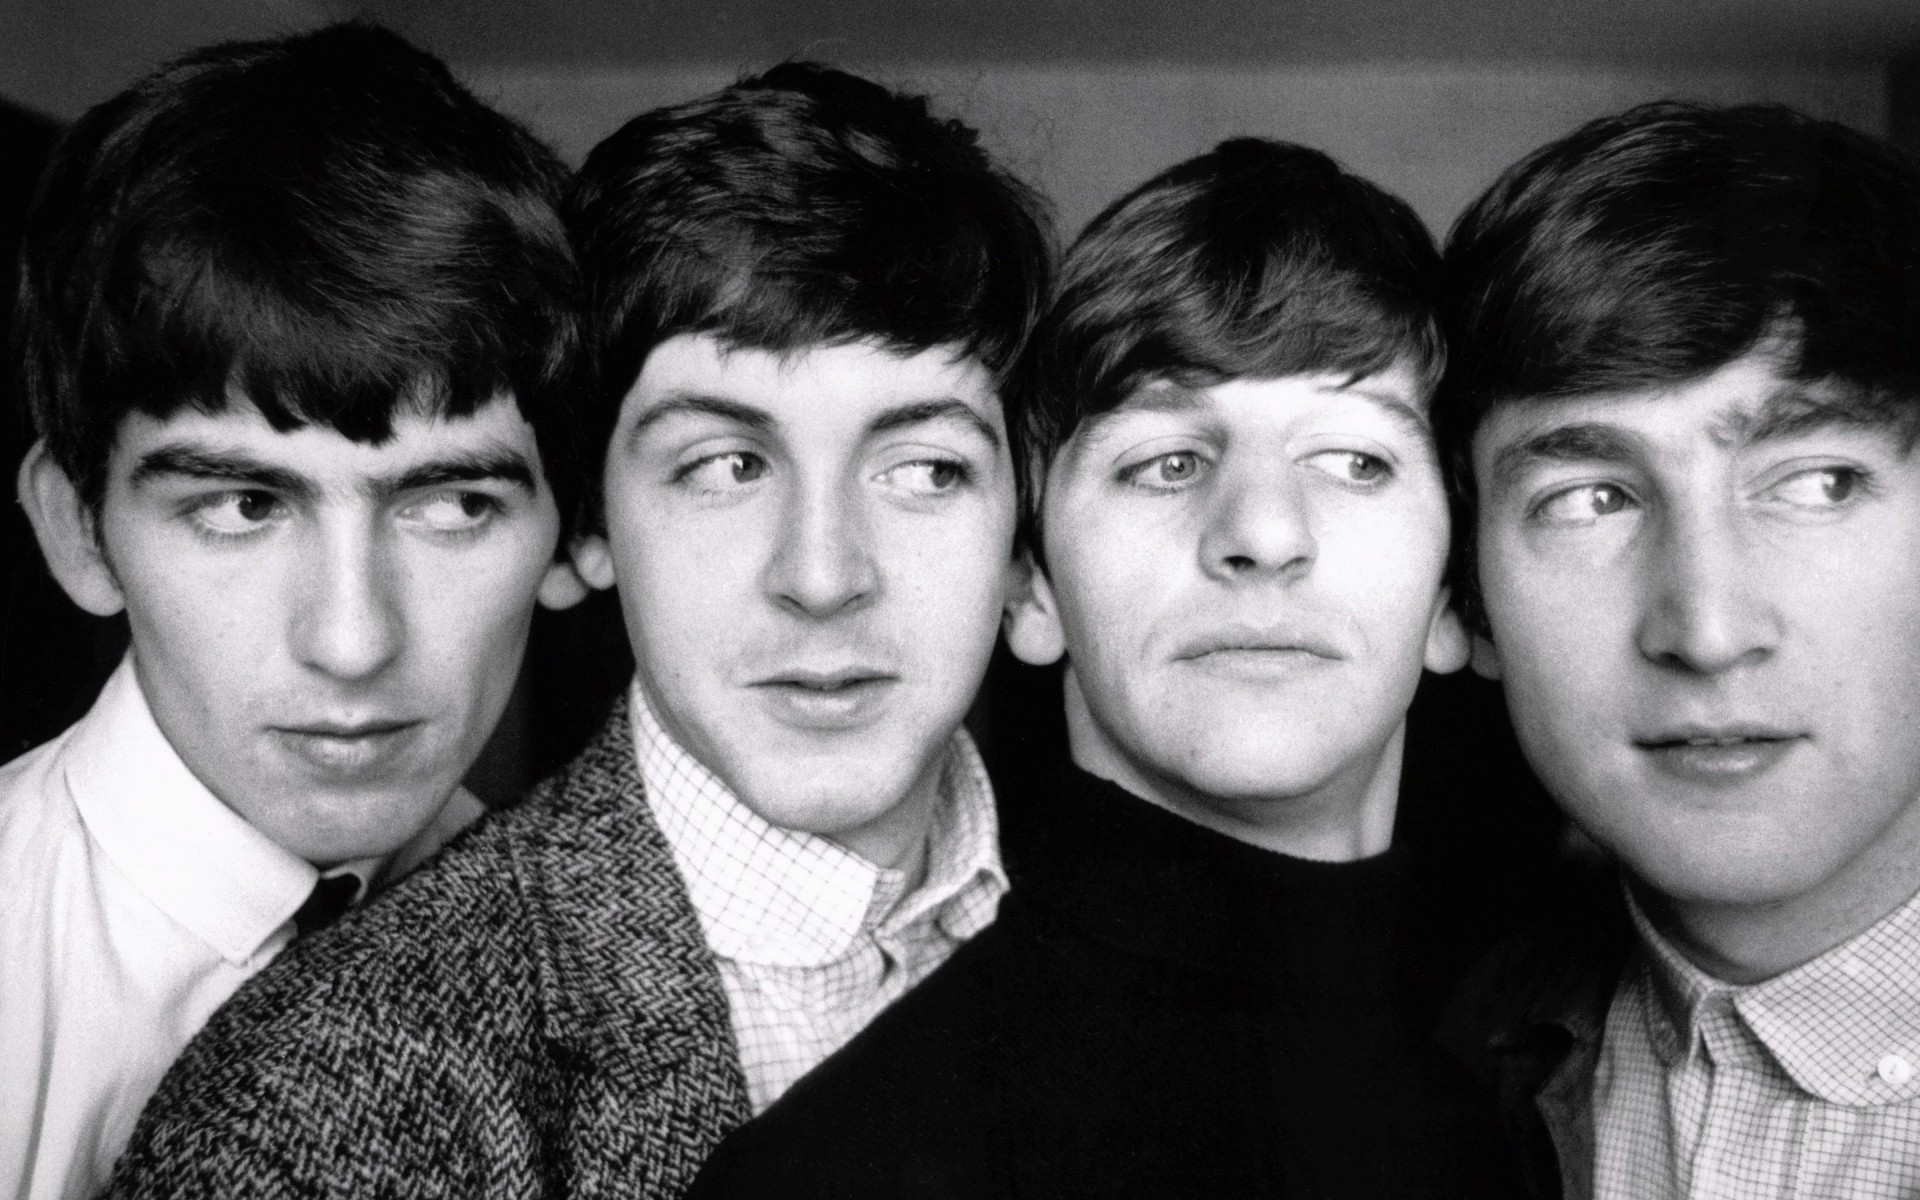 bands portrait adult man two group movie actress three wear facial expression actor woman music musician the beatles legends